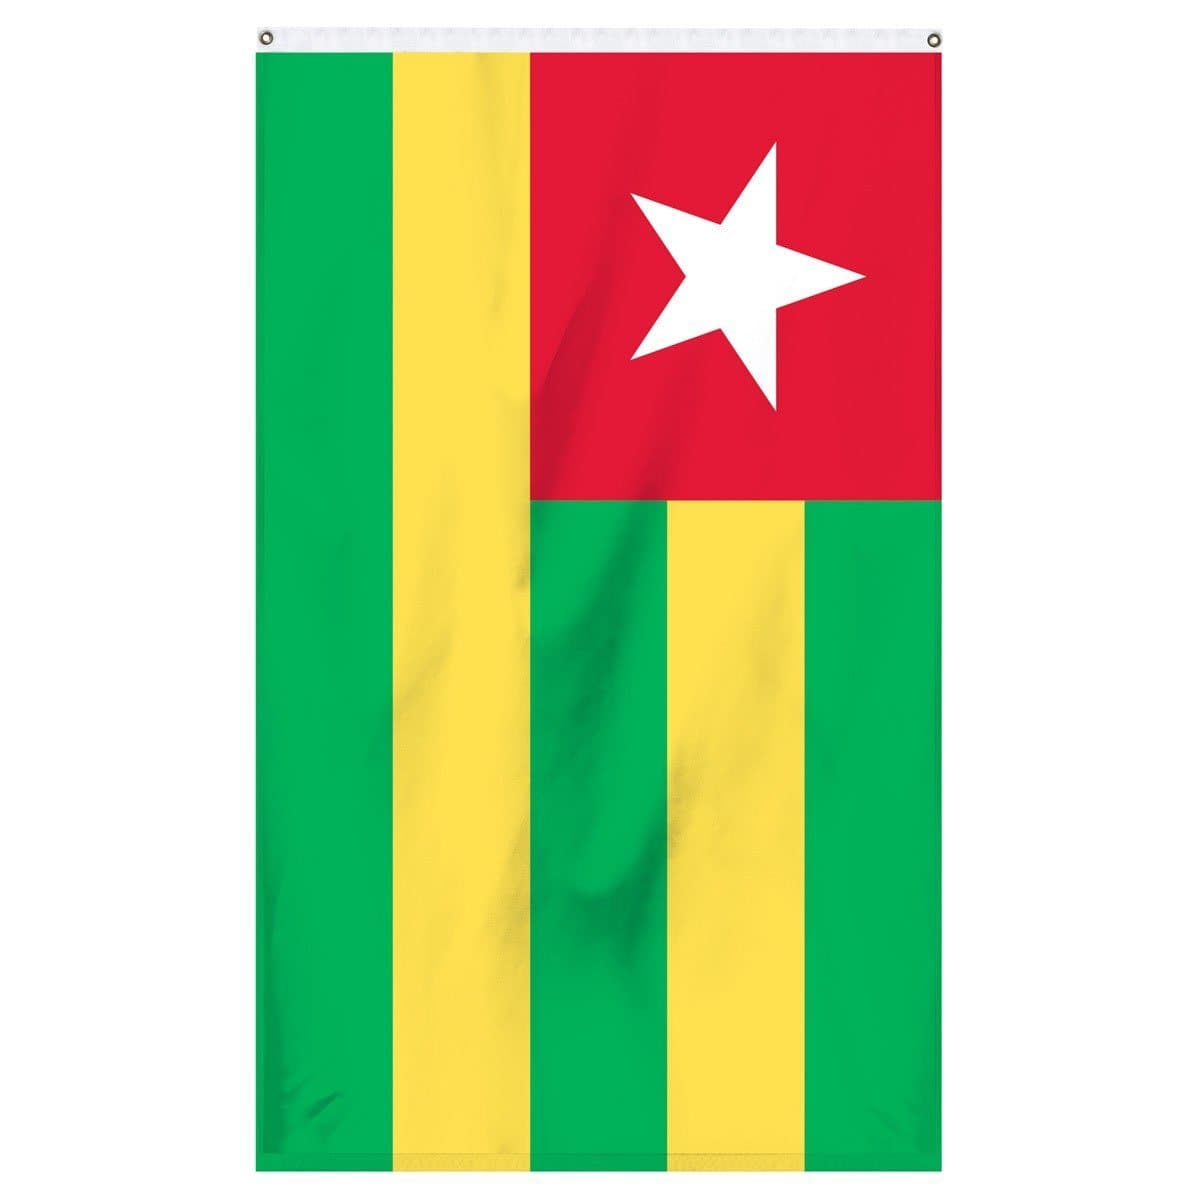 Togo National Flag for sale to buy online from Atlantic Flag and Pole. Green and yellow striped flag with a red square in the corner with a white star.